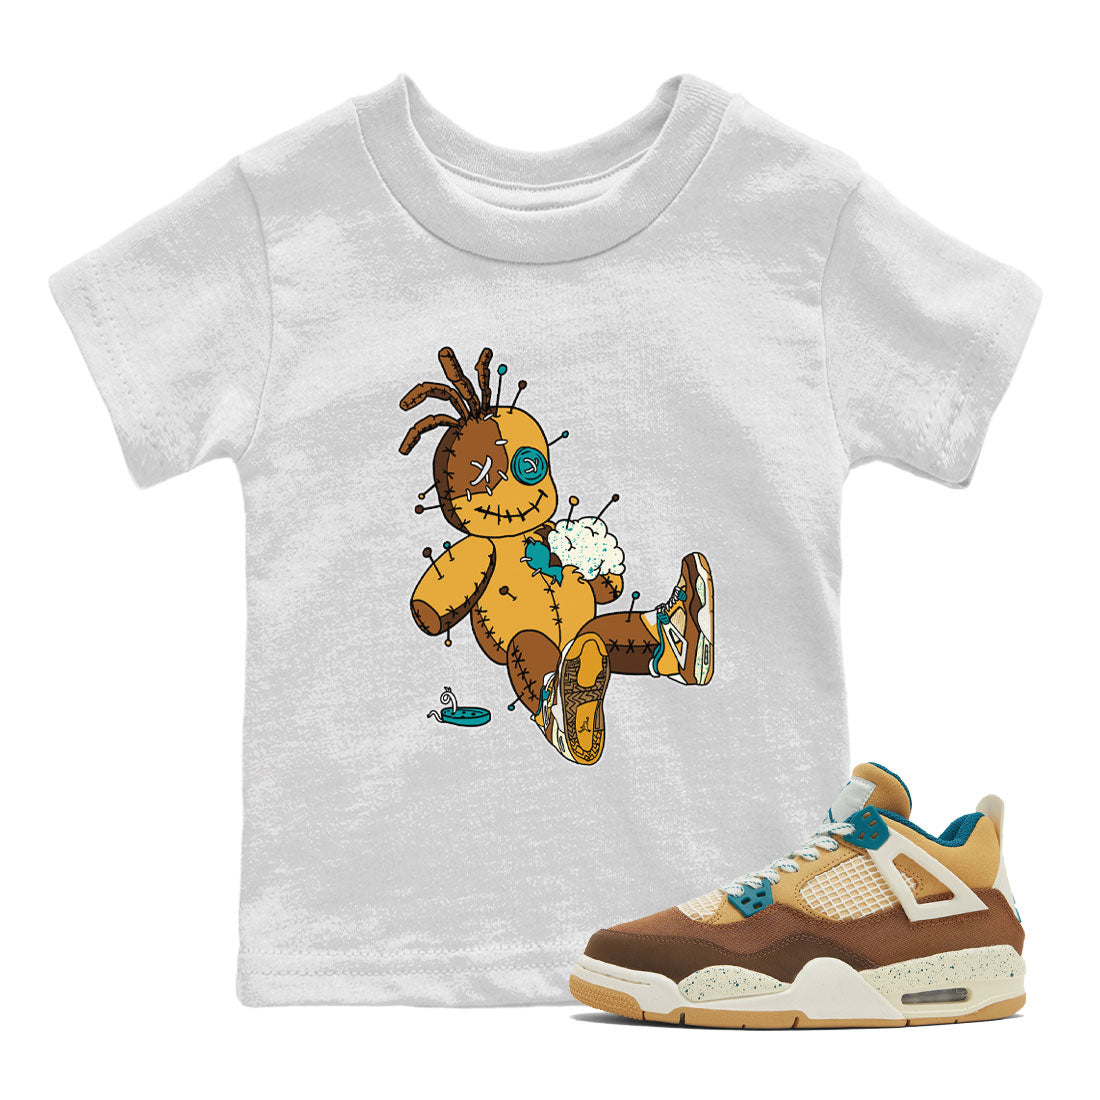 4s Cacao Wow shirt to match jordans Voodoo Doll sneaker tees Air Jordan 4 Cacao Wow SNRT Sneaker Release Tees Baby Toddler White 1 T-Shirt